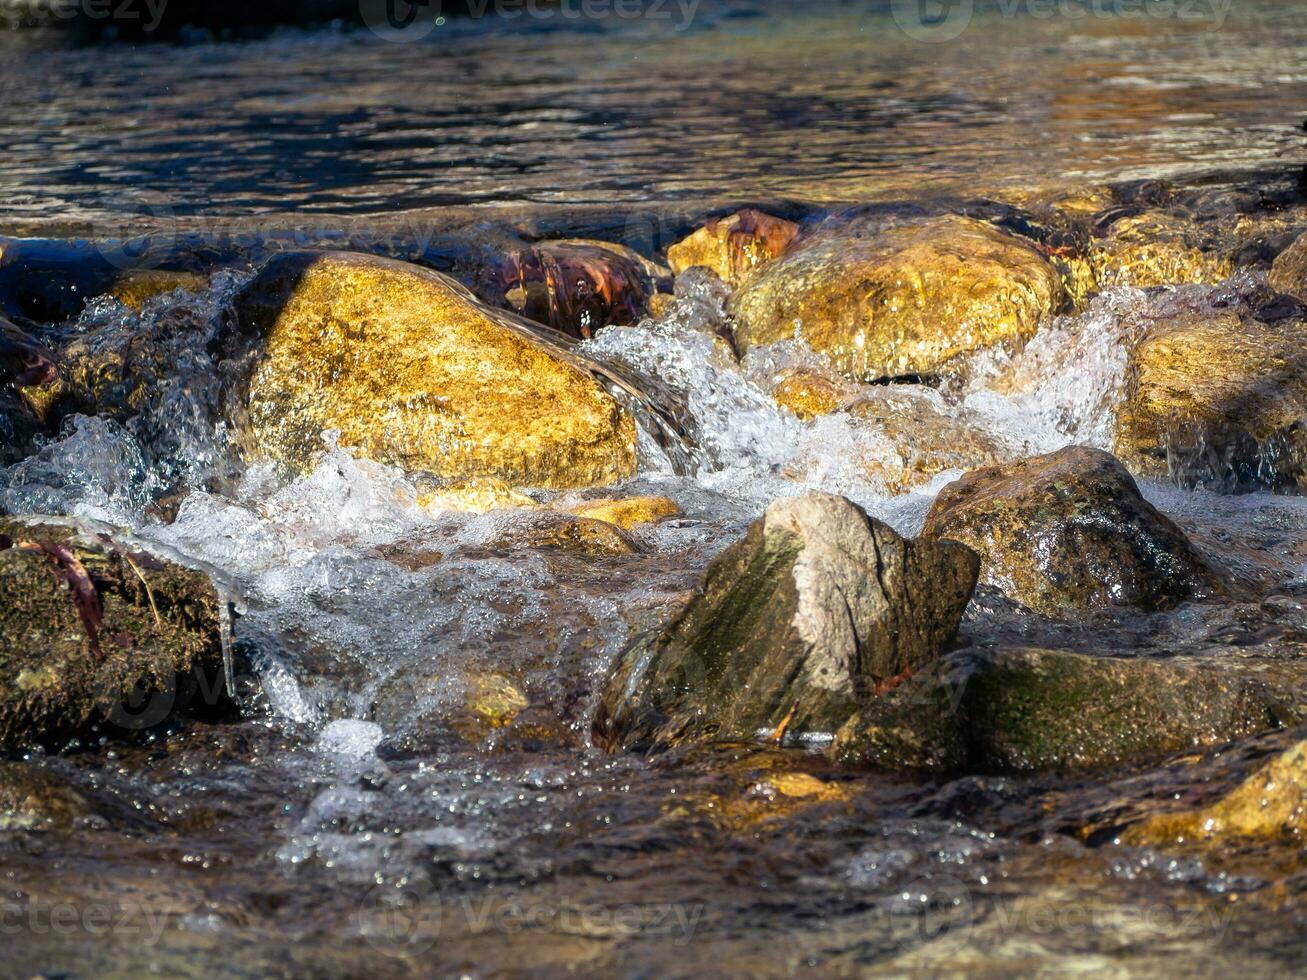 Stones in the cold mountain creek photo